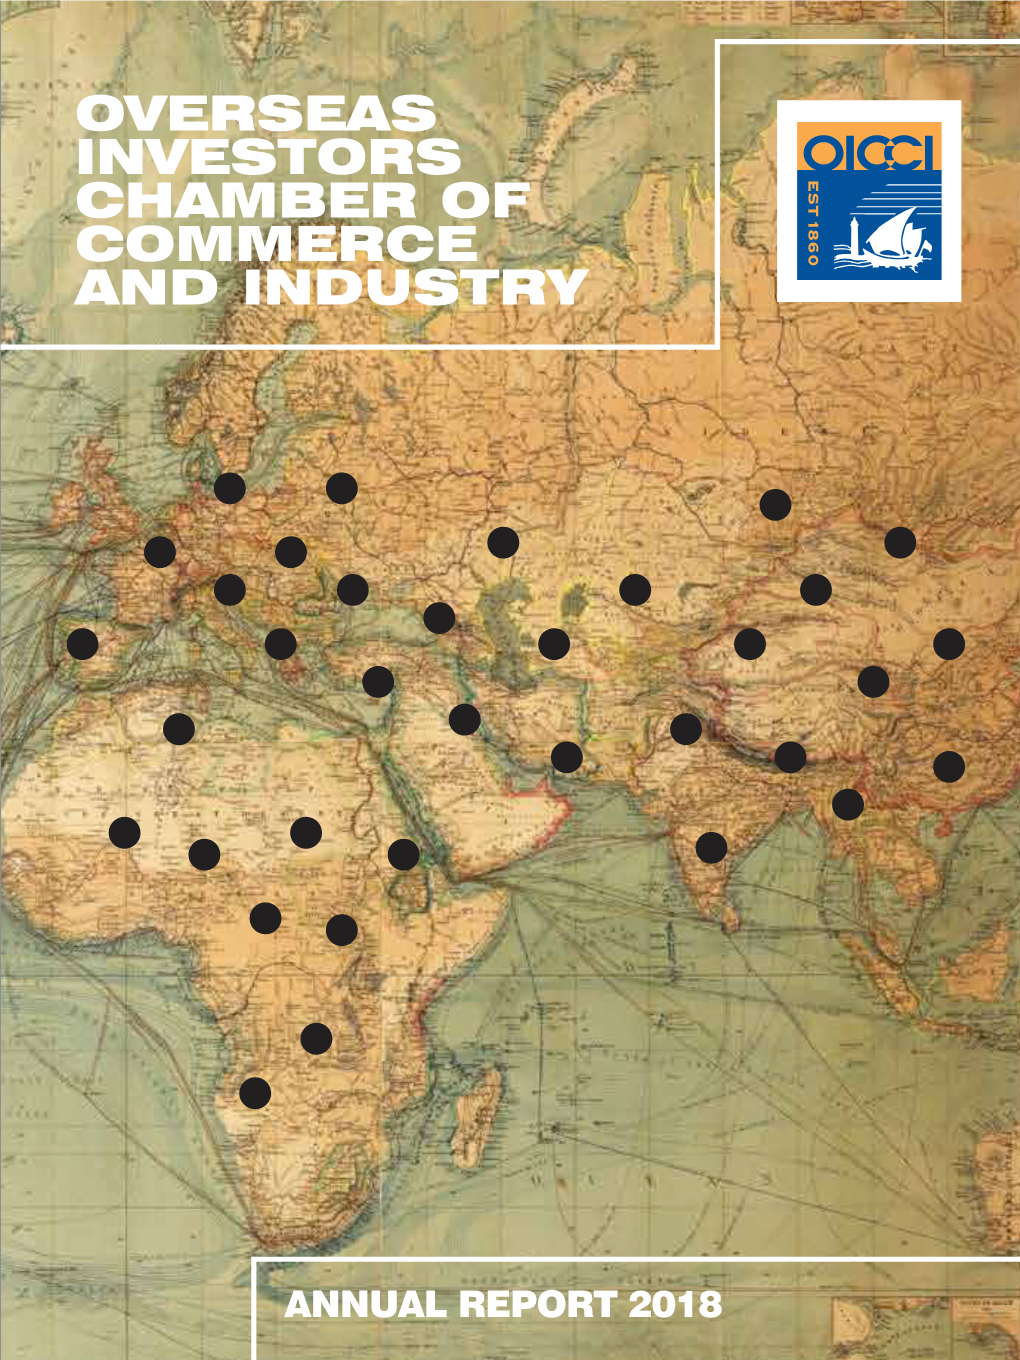 Overseas Investors Chamber of Commerce and Industry